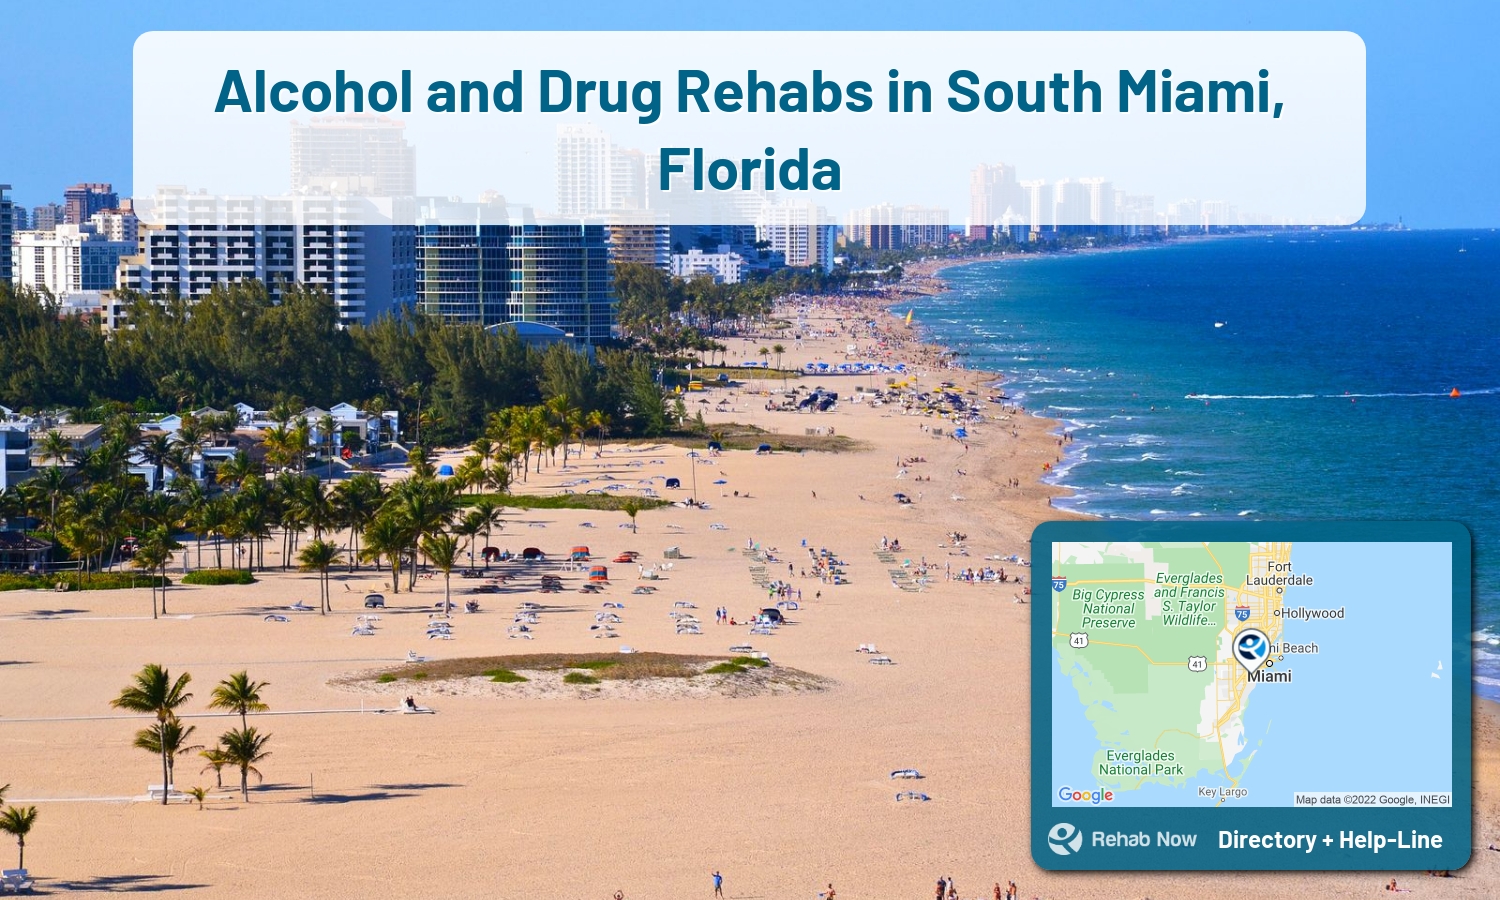 Easily find the top Rehab Centers in South Miami, FL. We researched hard to pick the best alcohol and drug rehab centers in Florida.